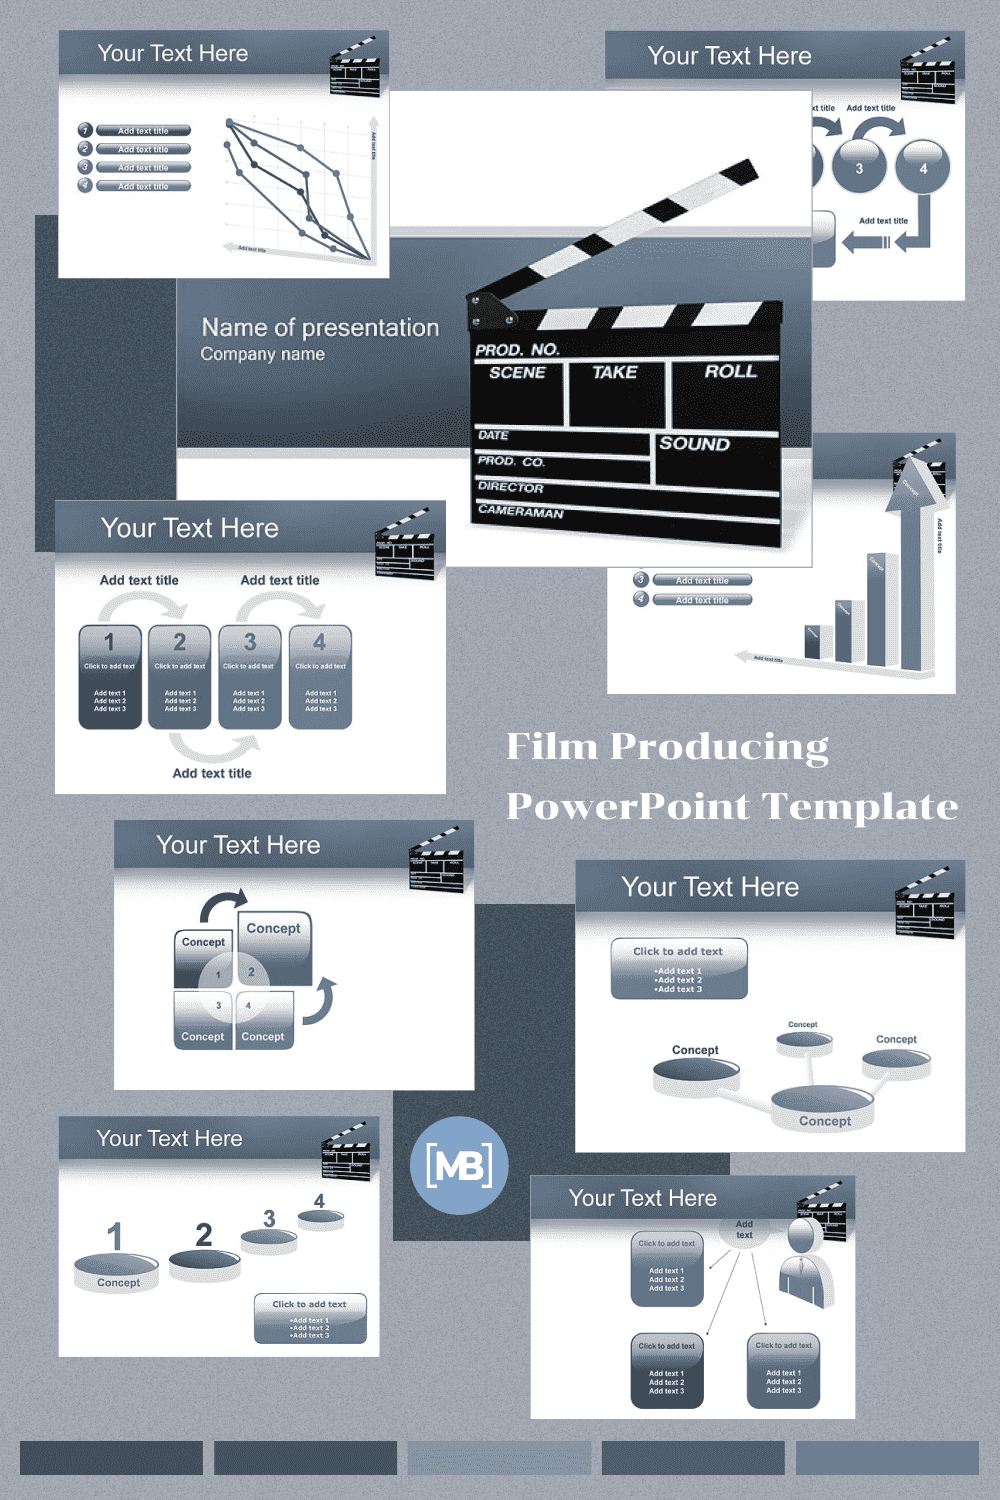 Film producing powerpoint template.